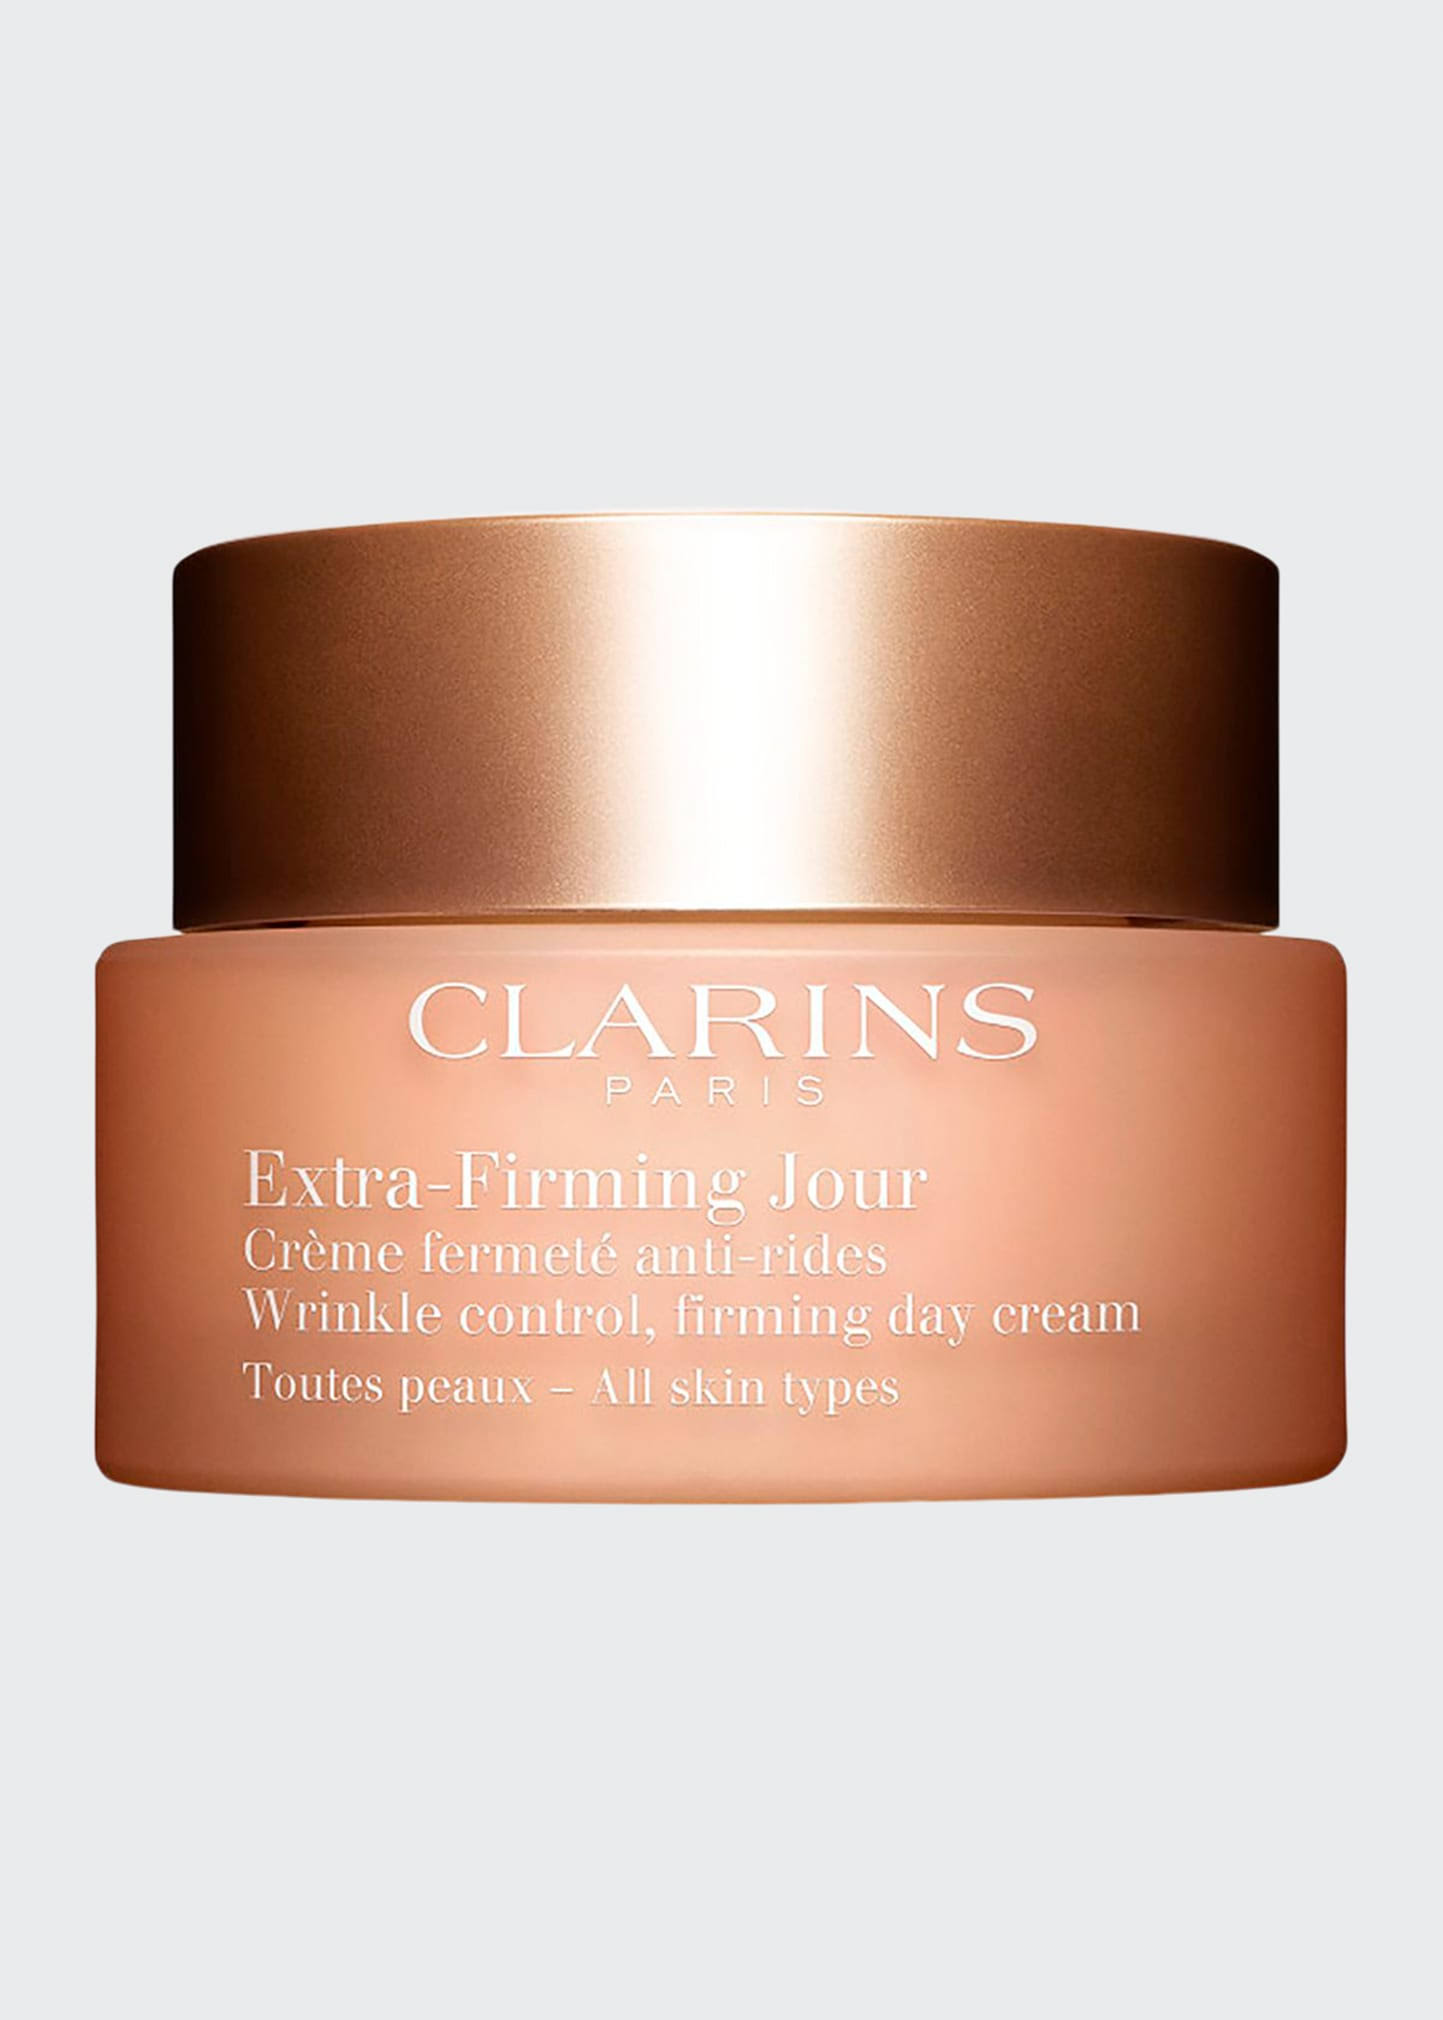 Clarins Extra-Firming Day Cream - All Skin Types, 1.7 oz.